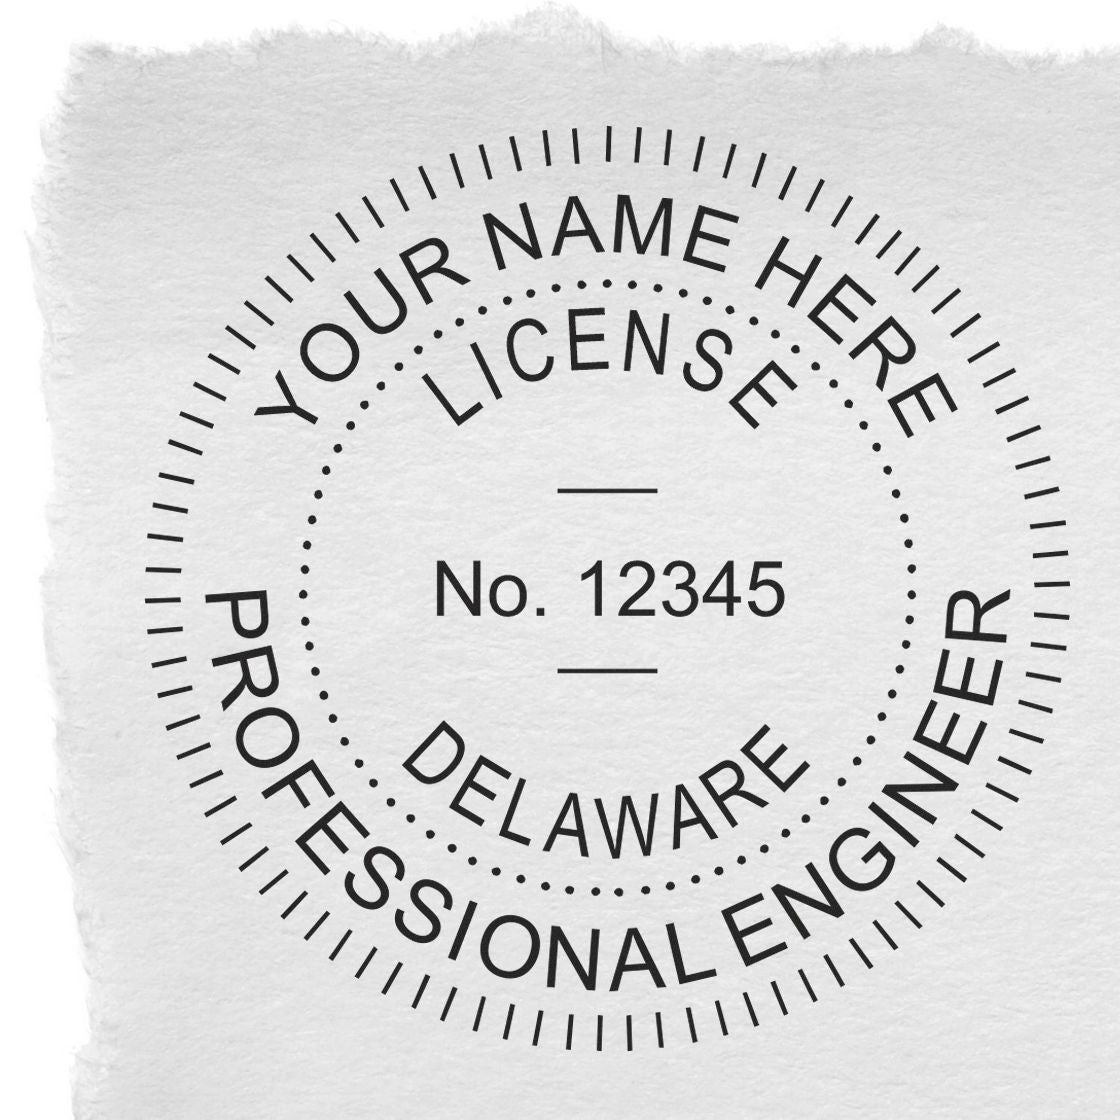 This paper is stamped with a sample imprint of the Delaware Professional Engineer Seal Stamp, signifying its quality and reliability.